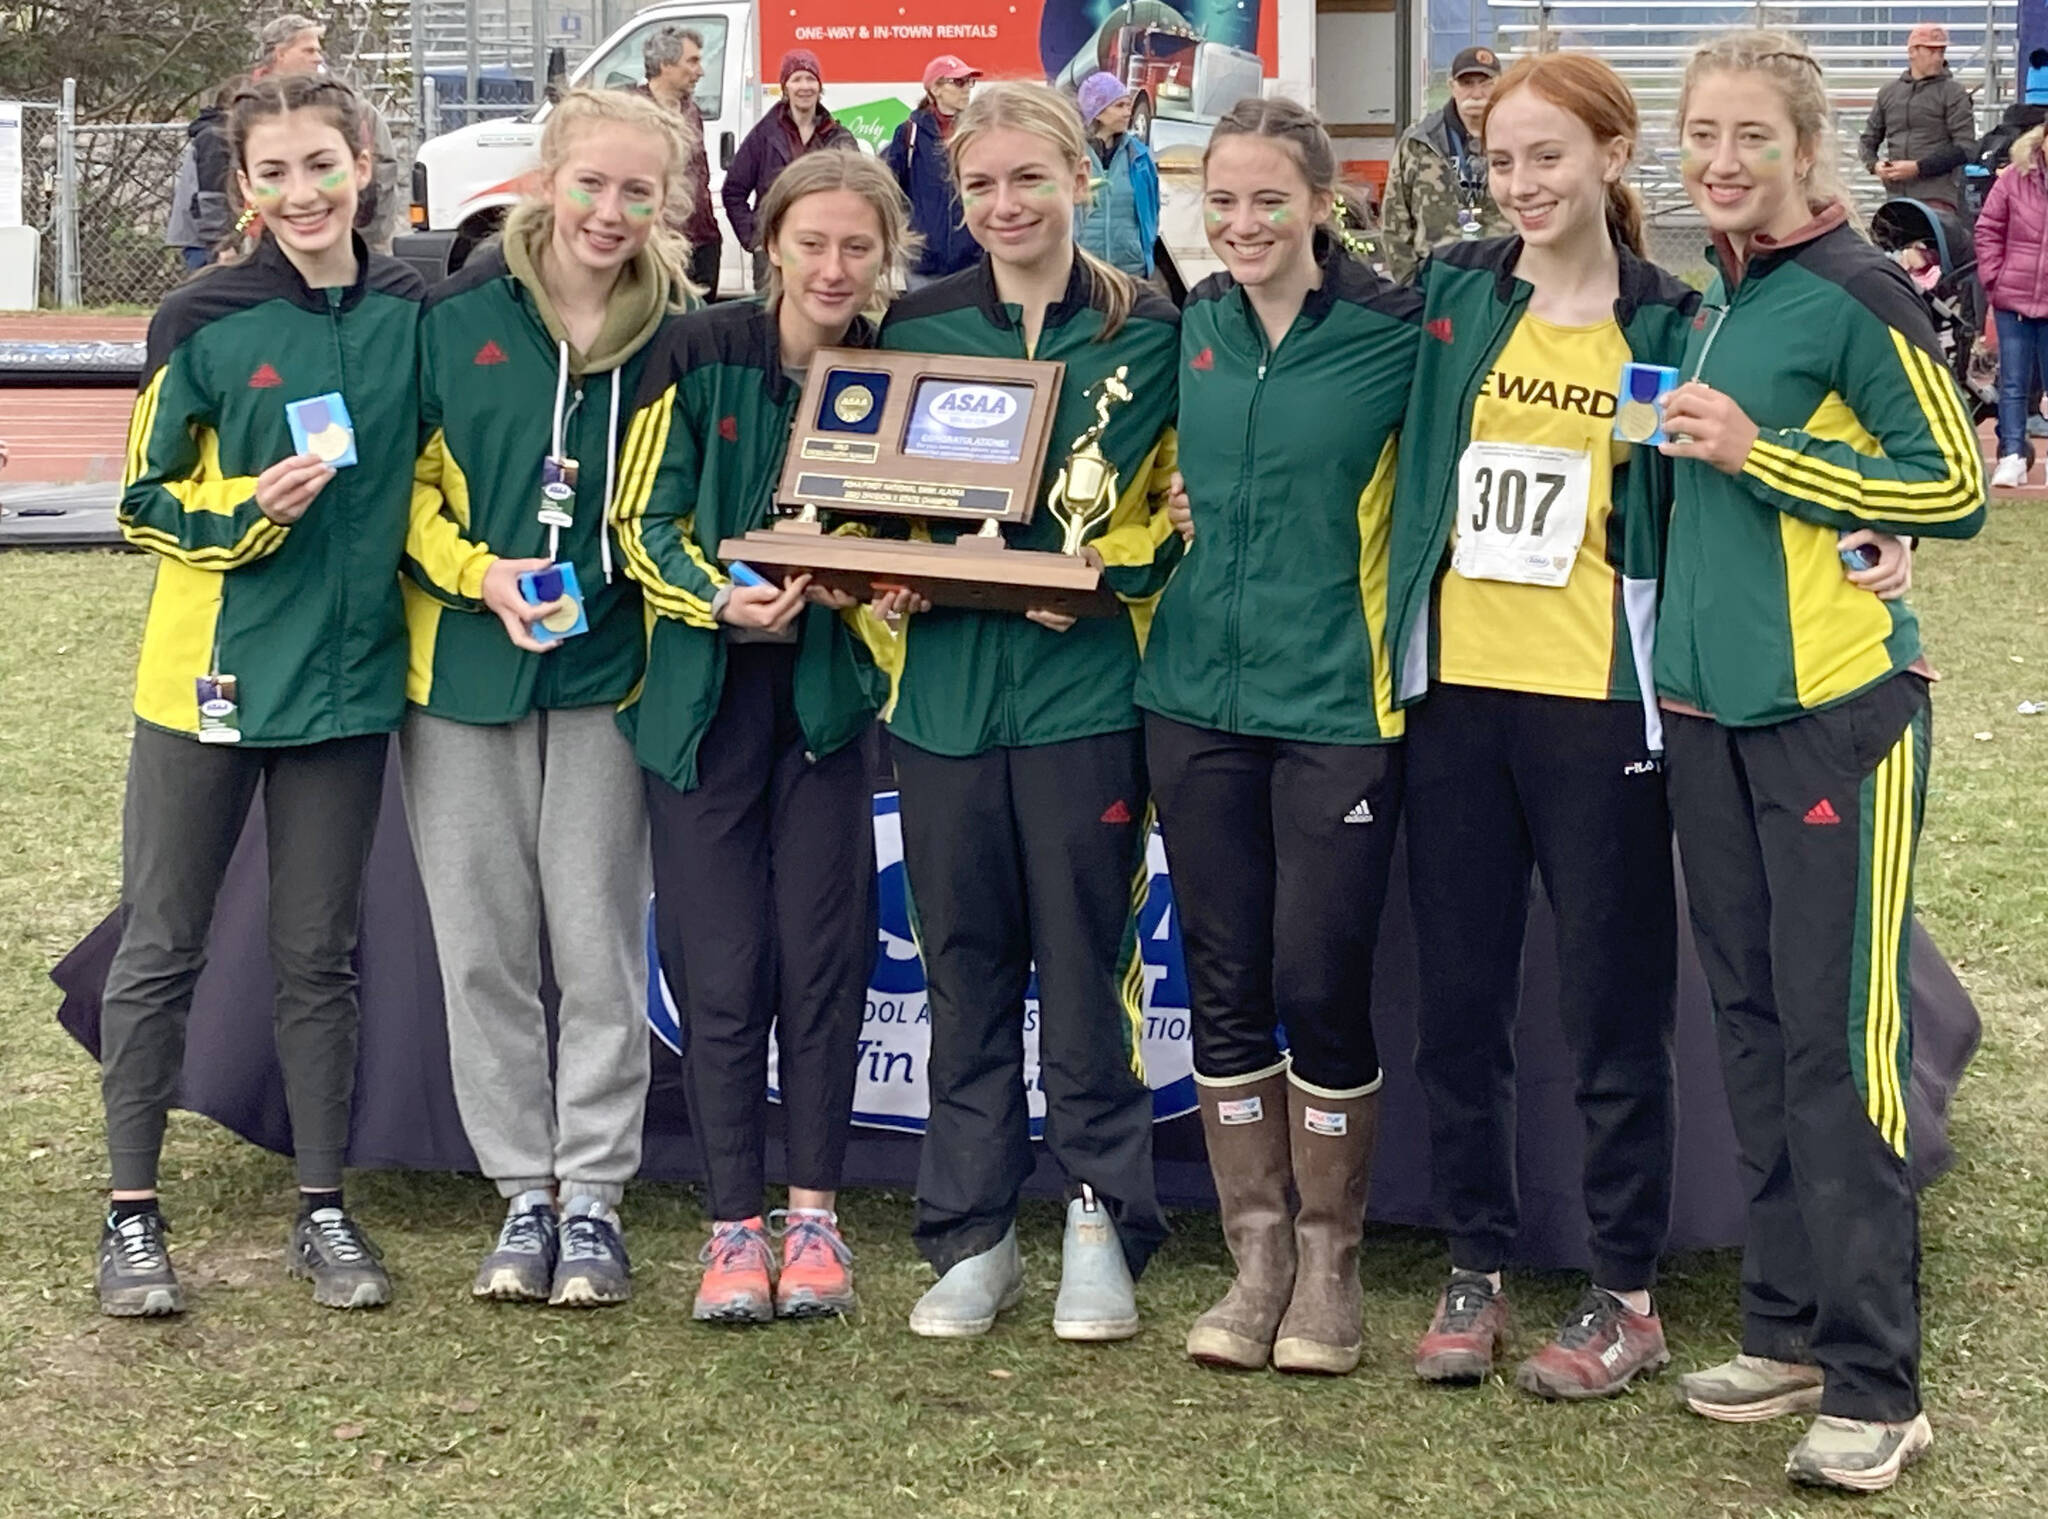 The Seward girls won the Division II team title at the state cross-country meet Saturday, Oct. 8, 2022, at Bartlett High School in Anchorage, Alaska. (Photo by Jeff Helminiak/Peninsula Clarion)